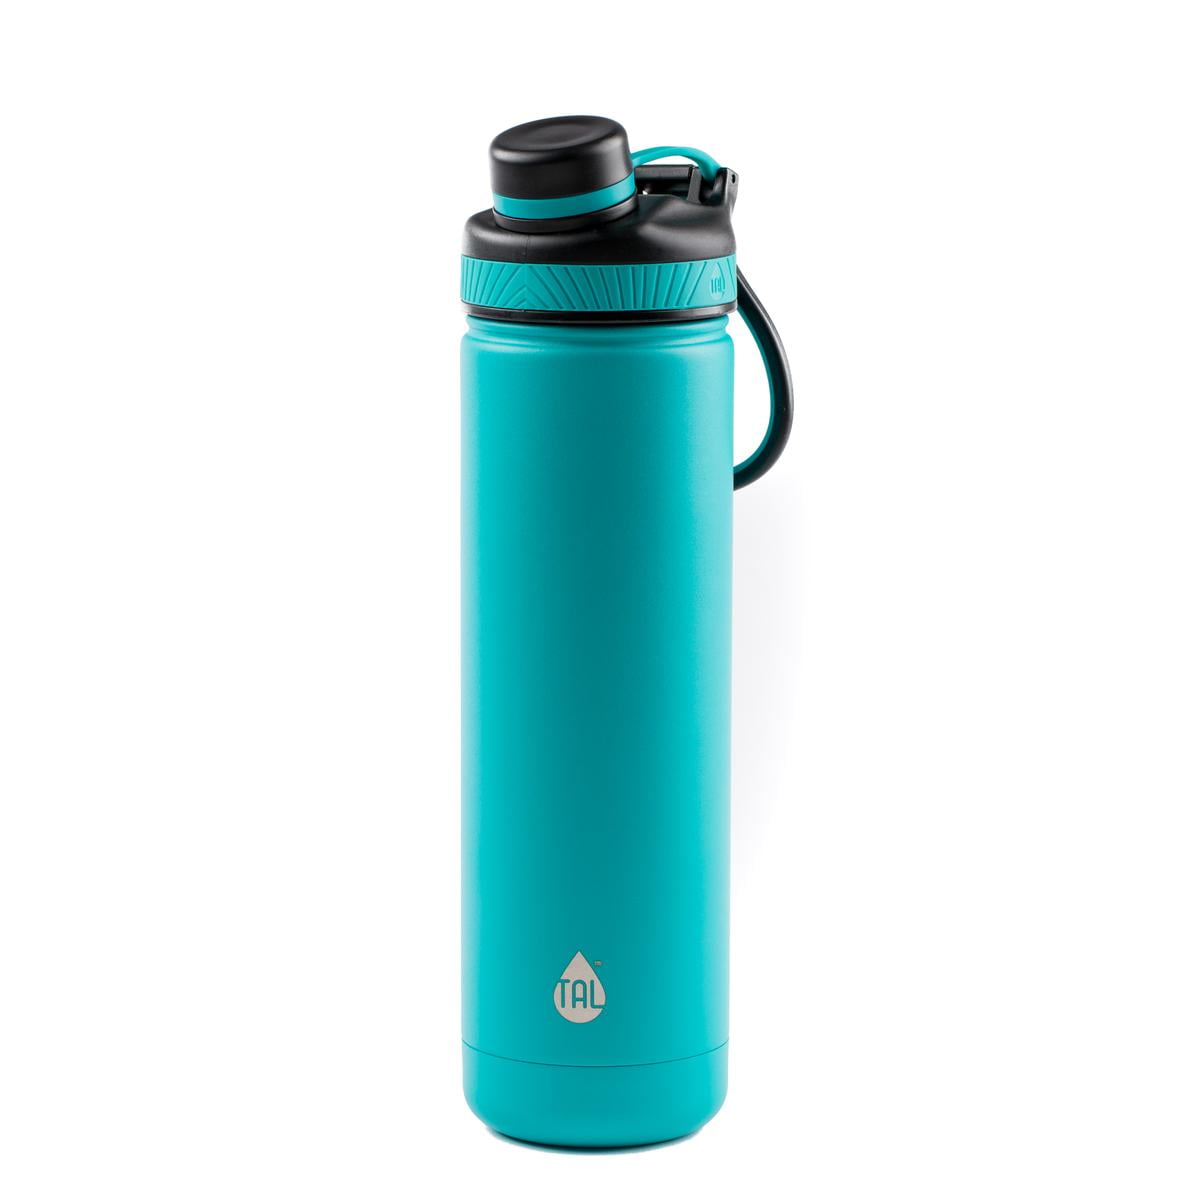  Tal 64OZ Ranger Pro Stainless Steel Vacuum Insulated Water  Bottle - Leak-Proof Double Walled Thermos w/Carry Loop 80 Hrs Cold, 26 Hot  Reusable Metal holds 8 cups (WM2584) (Black): Home 